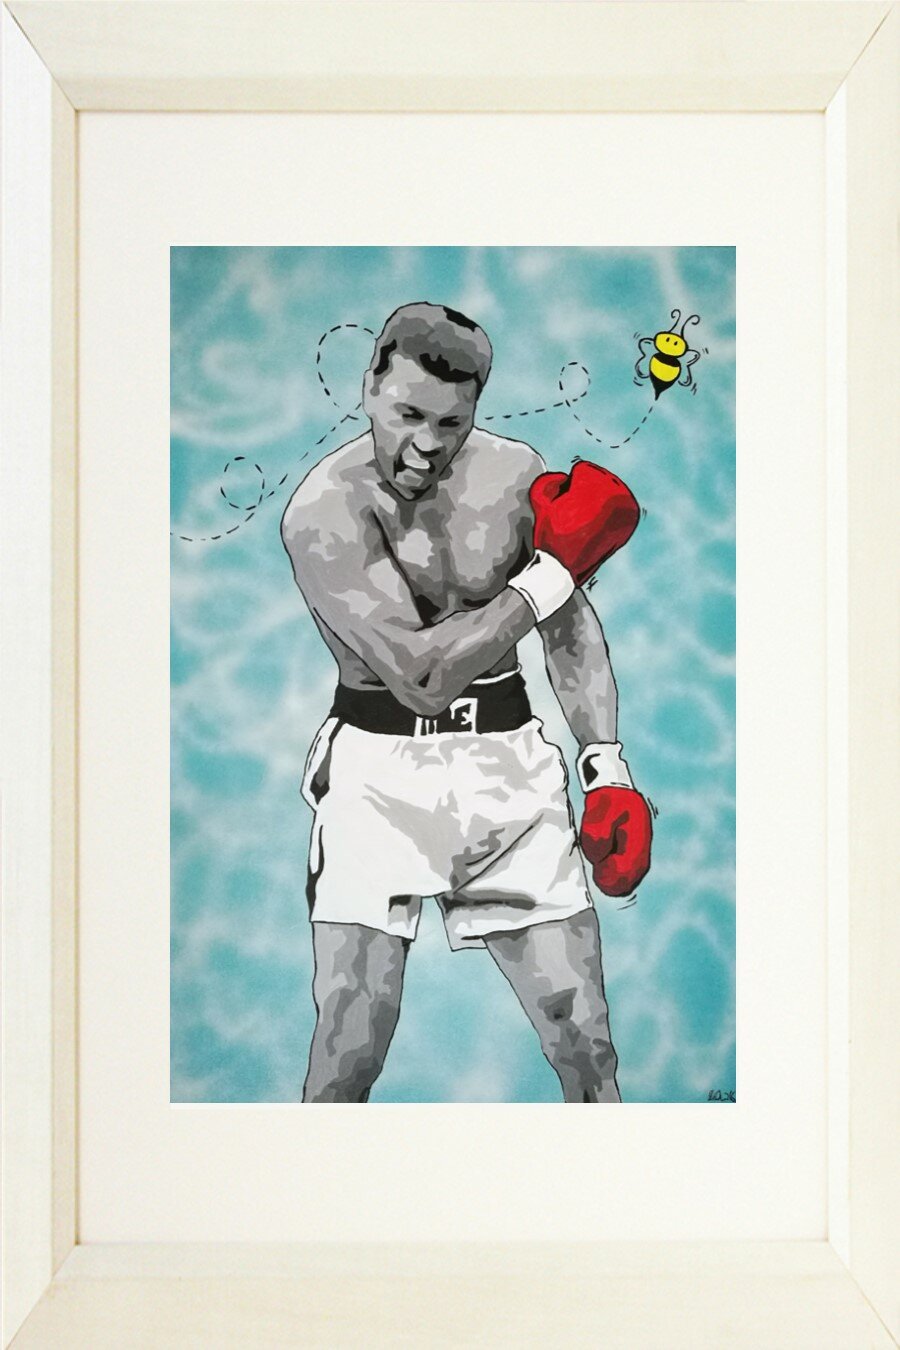 Buy Art For Less Muhammad Ali Boxing Legend Float Like A Butterfly Sting Like A Bee Framed Painting Print Wayfair